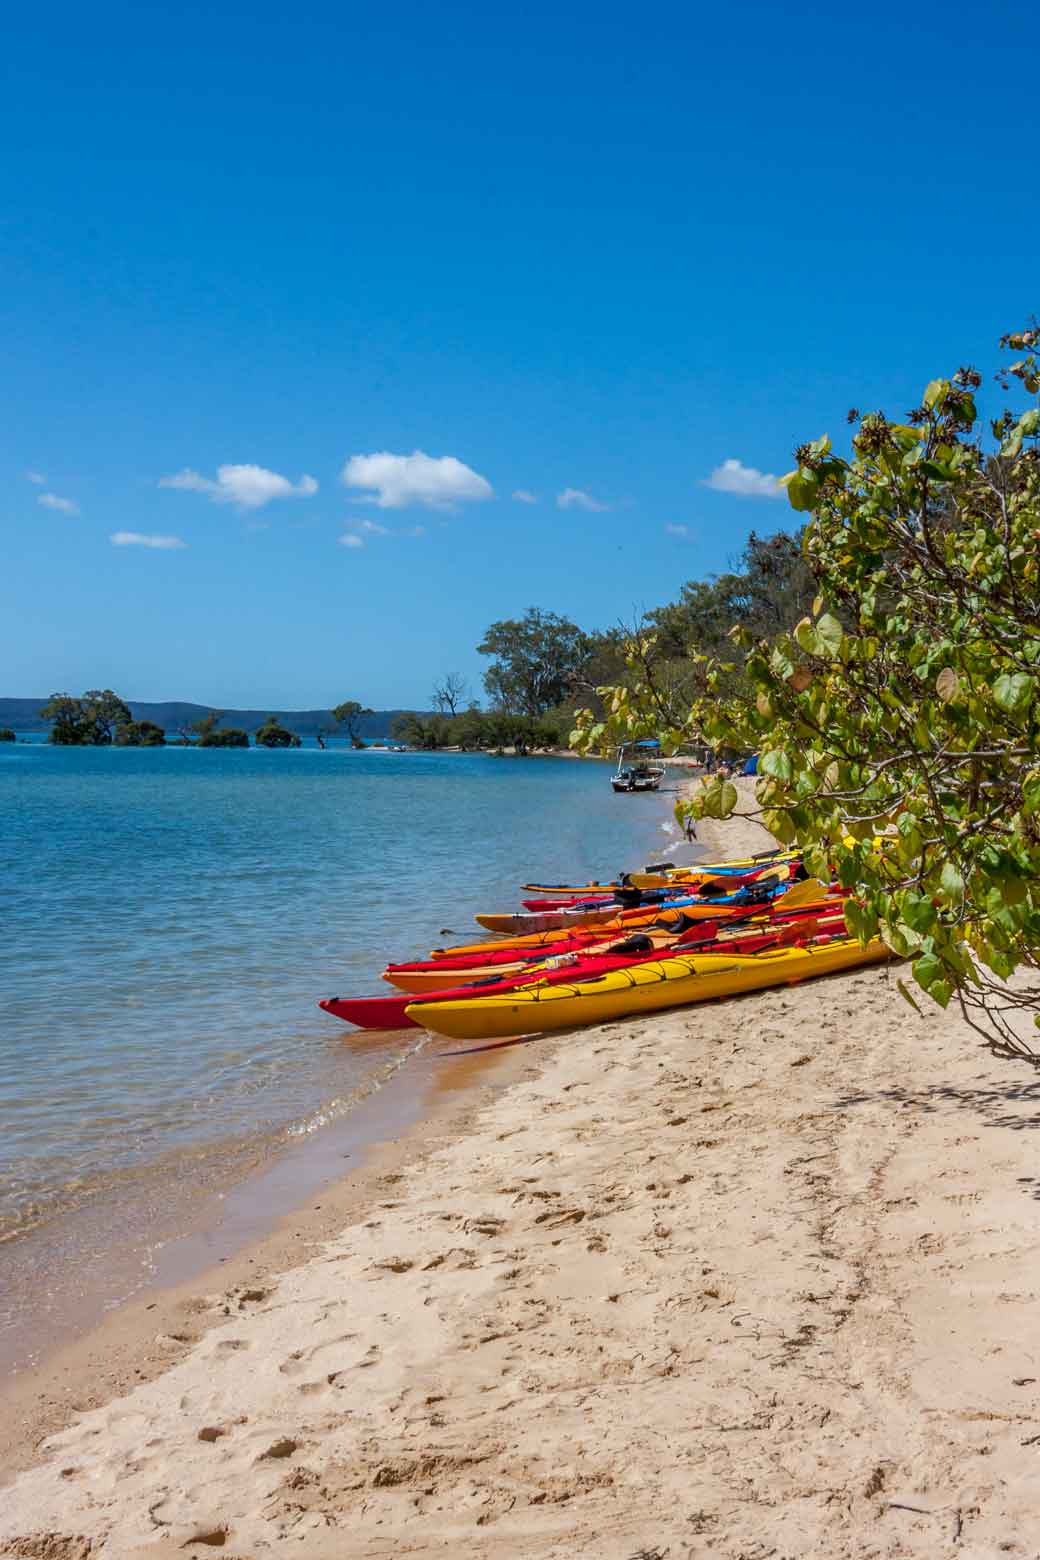 Things to do in Redland feature image of Coochiemudlo Island with kayaks on the beach